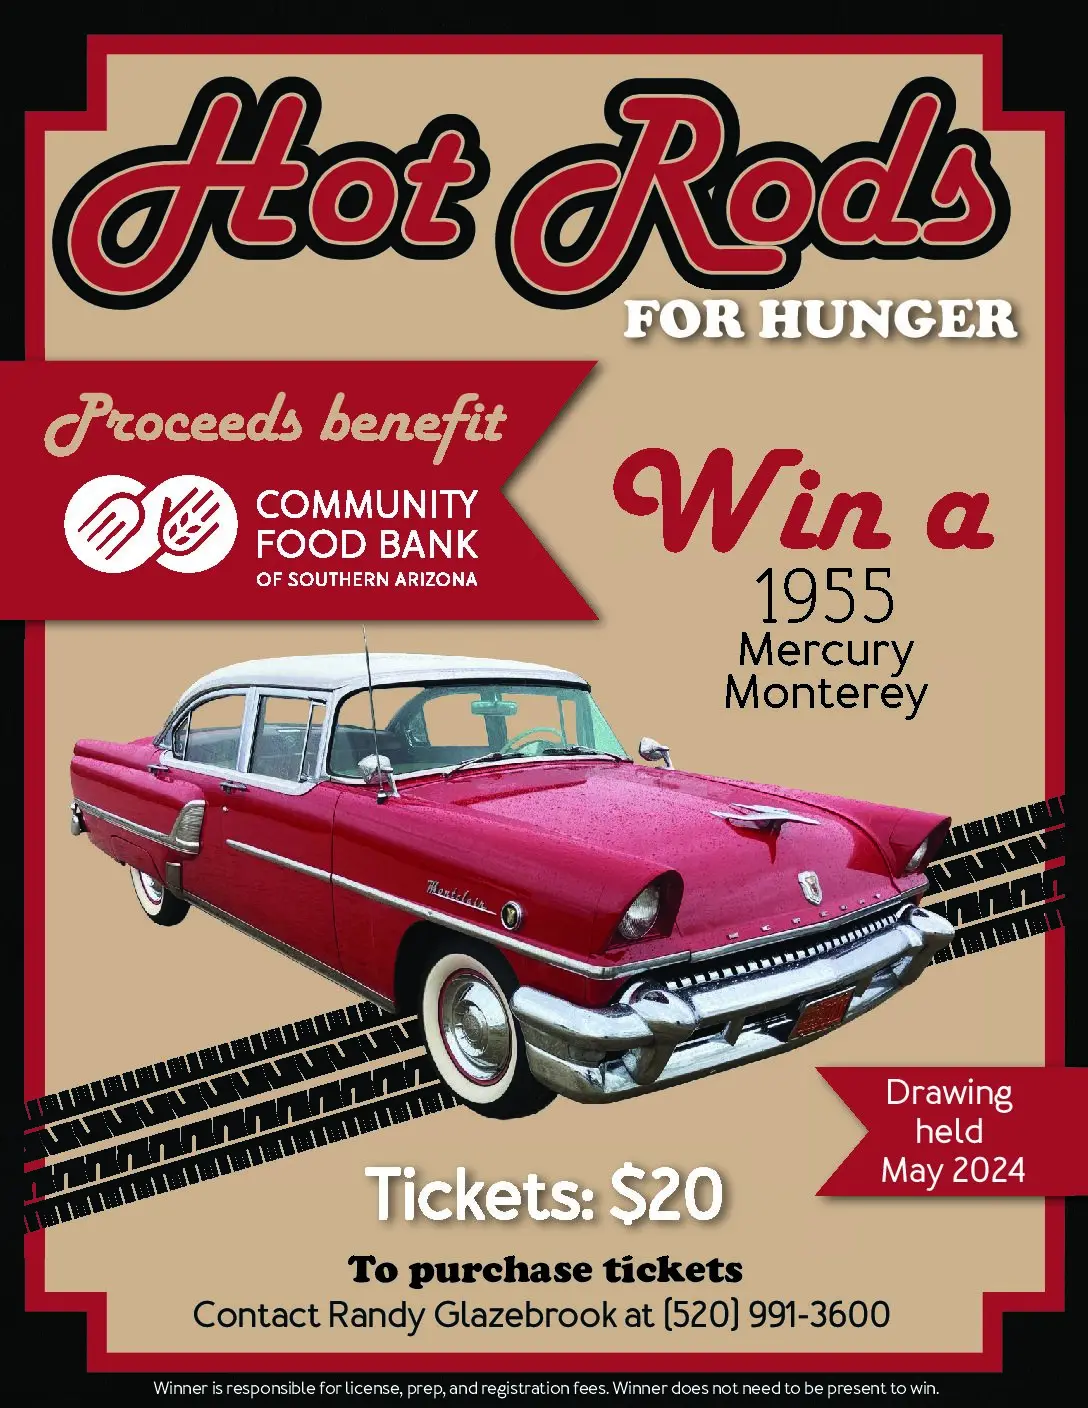 Hot Rods for Hunger flyer advertising the raffle drawing